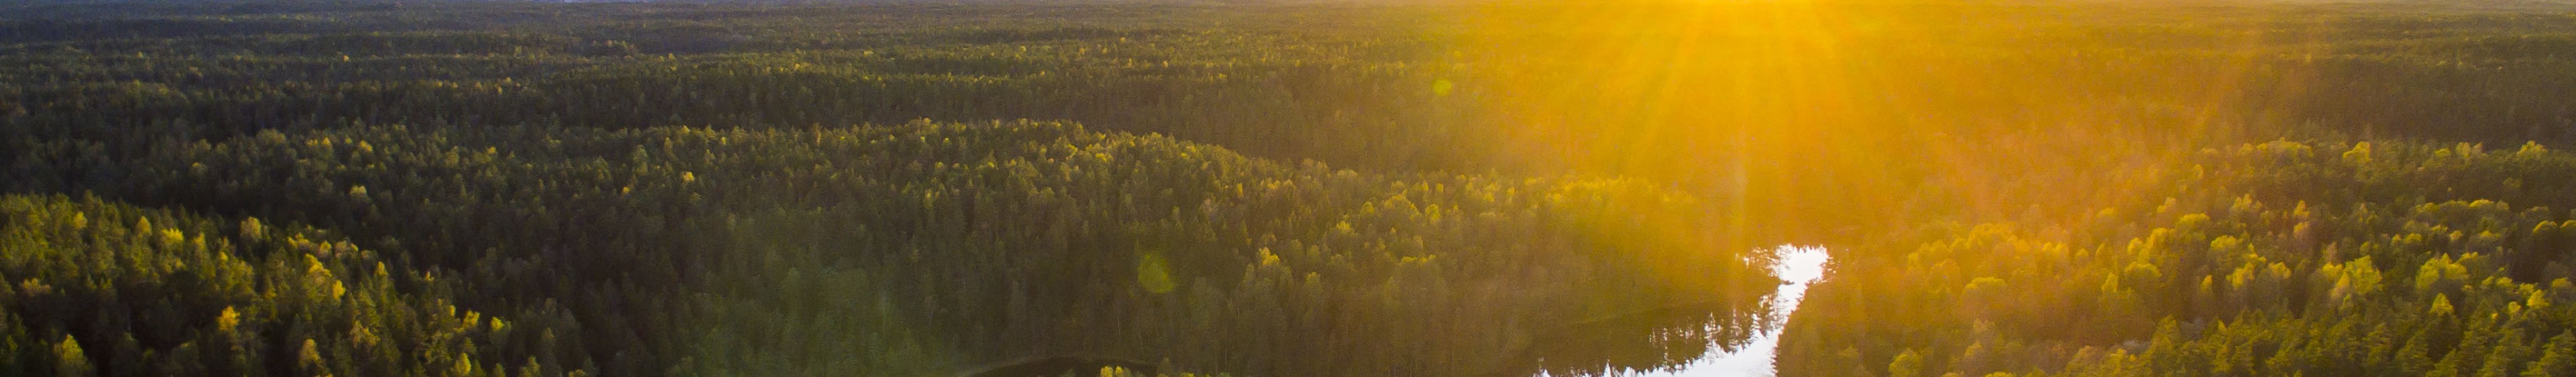 Aerial image of Nuuksio National Park in Espoo, Finland with the sun rising in a landscape of forests and lakes.